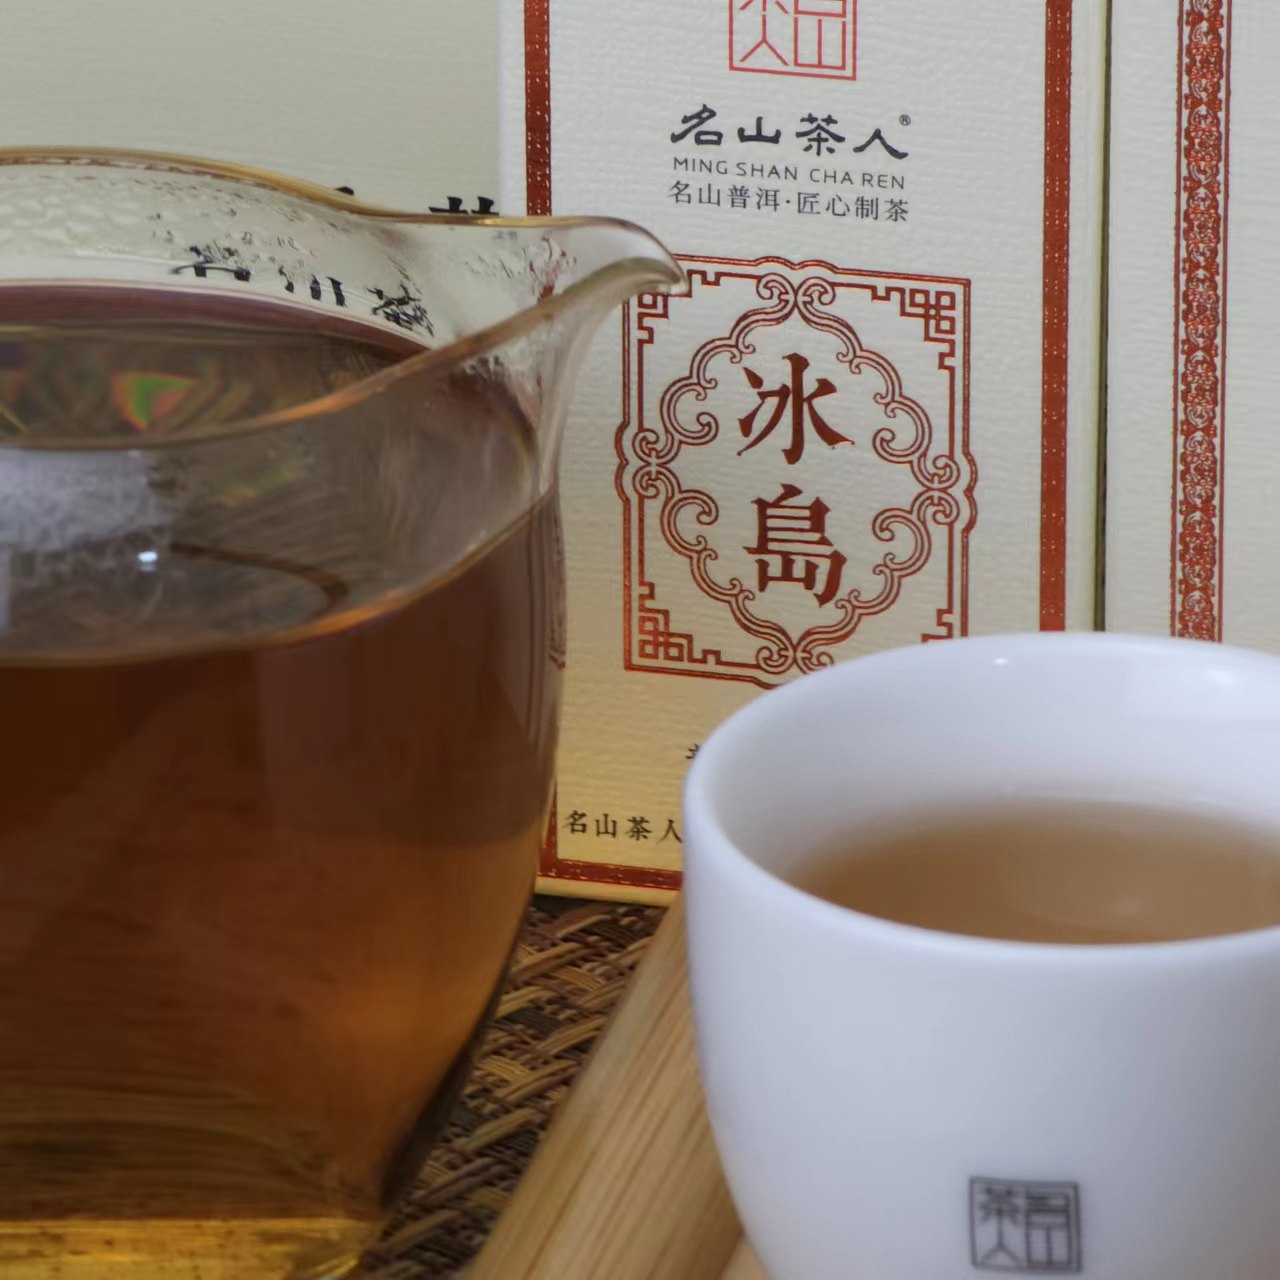 An affordable cup of Zen Tea Master's Icelandic raw tea next to a box of Icelandic raw tea (288g, 48g/box * 6boxes).